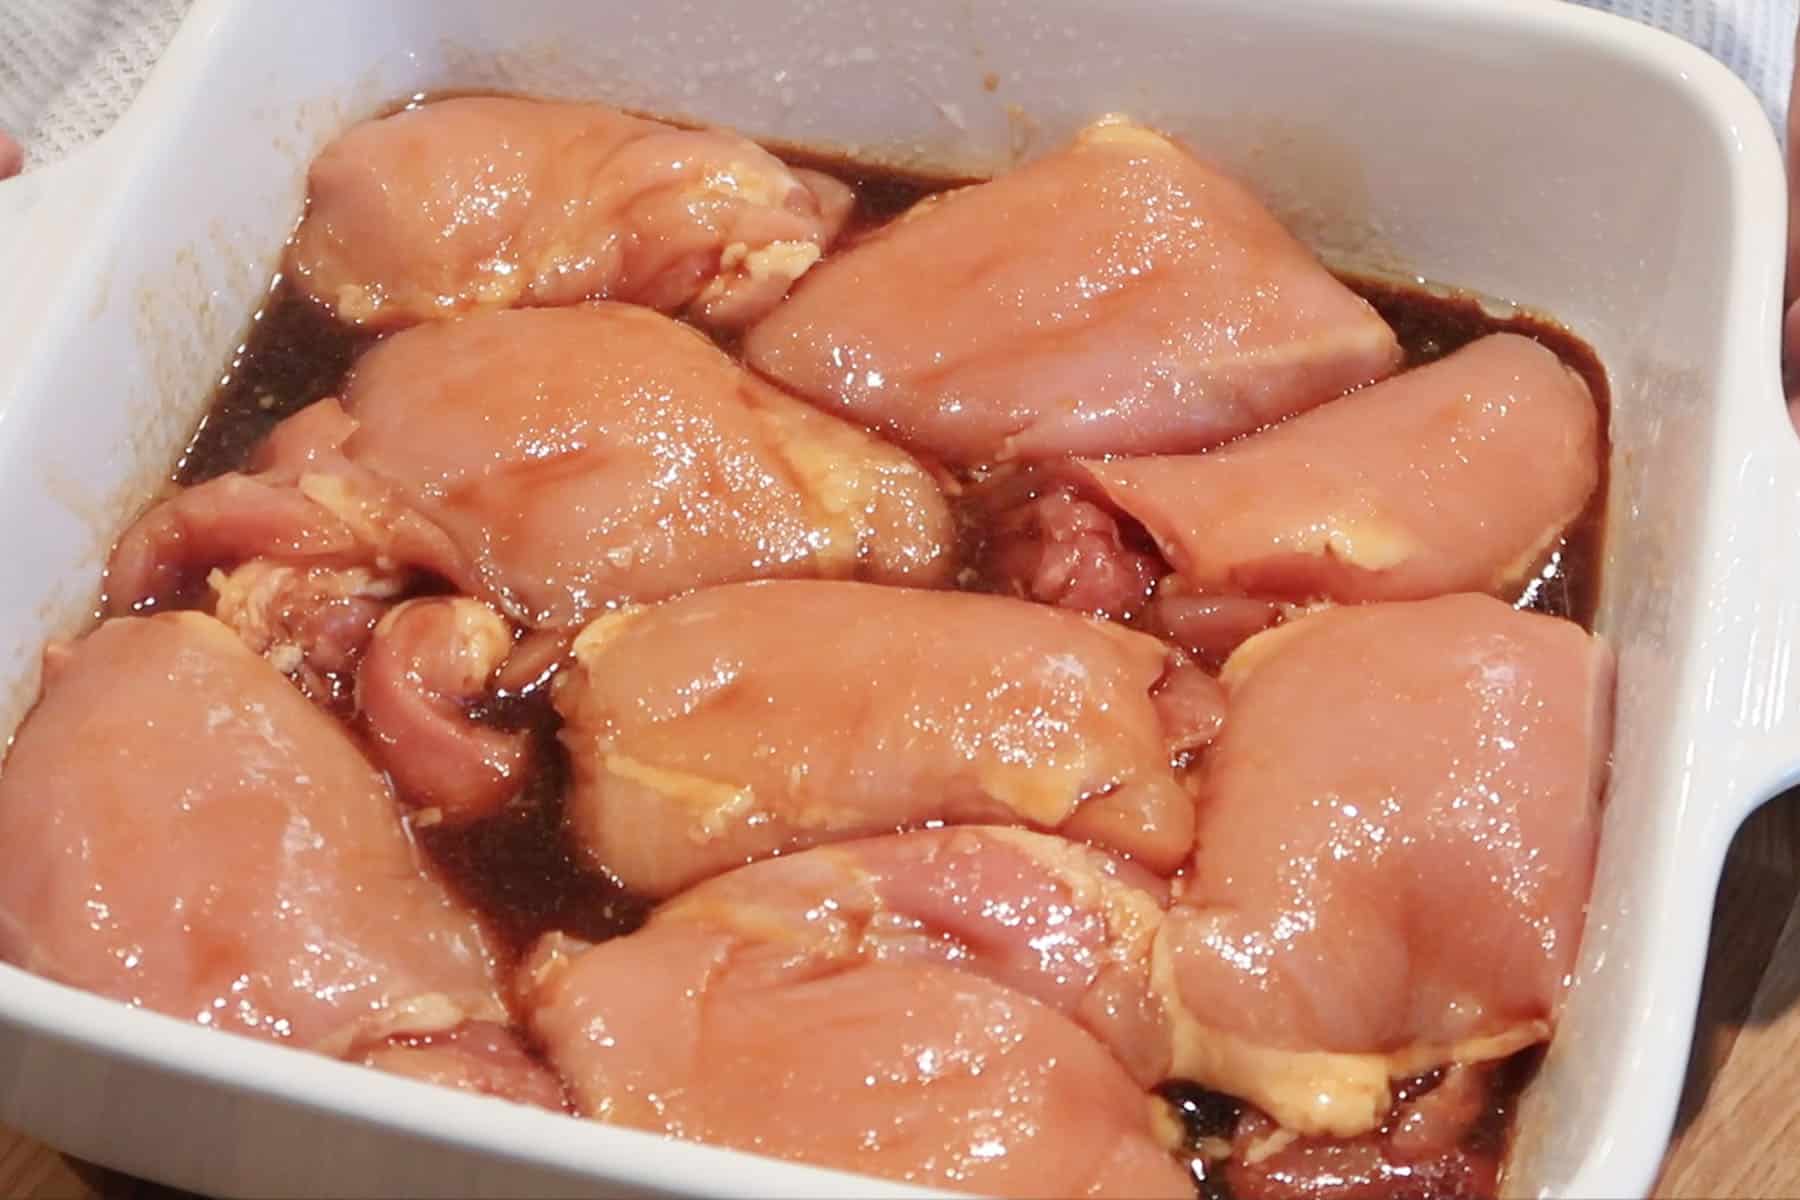 Honey Soy Chicken Thighs in a baking dish before baking